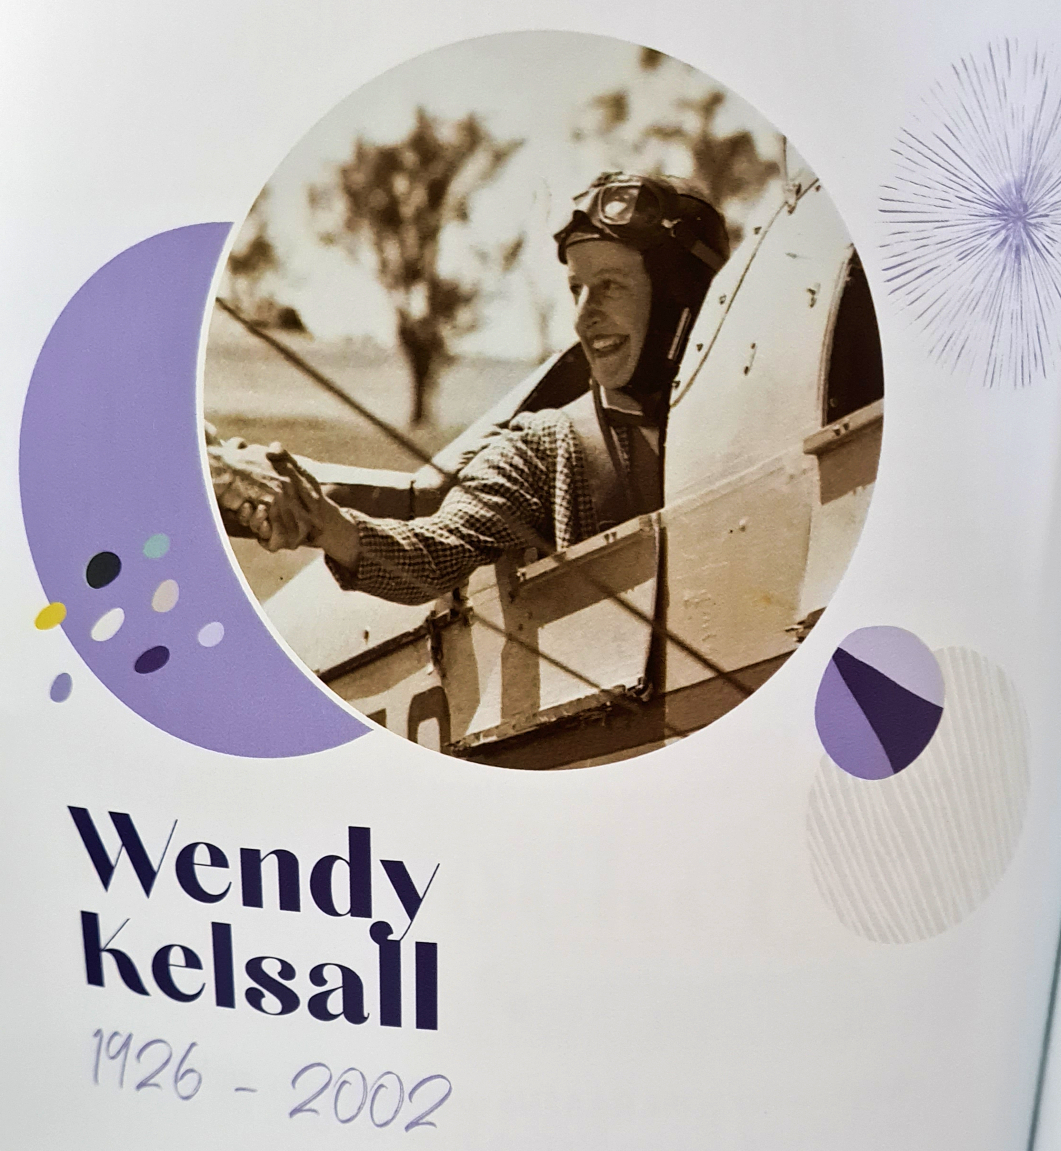 Photo of page from HerStory book featuring Wendy Kelsall